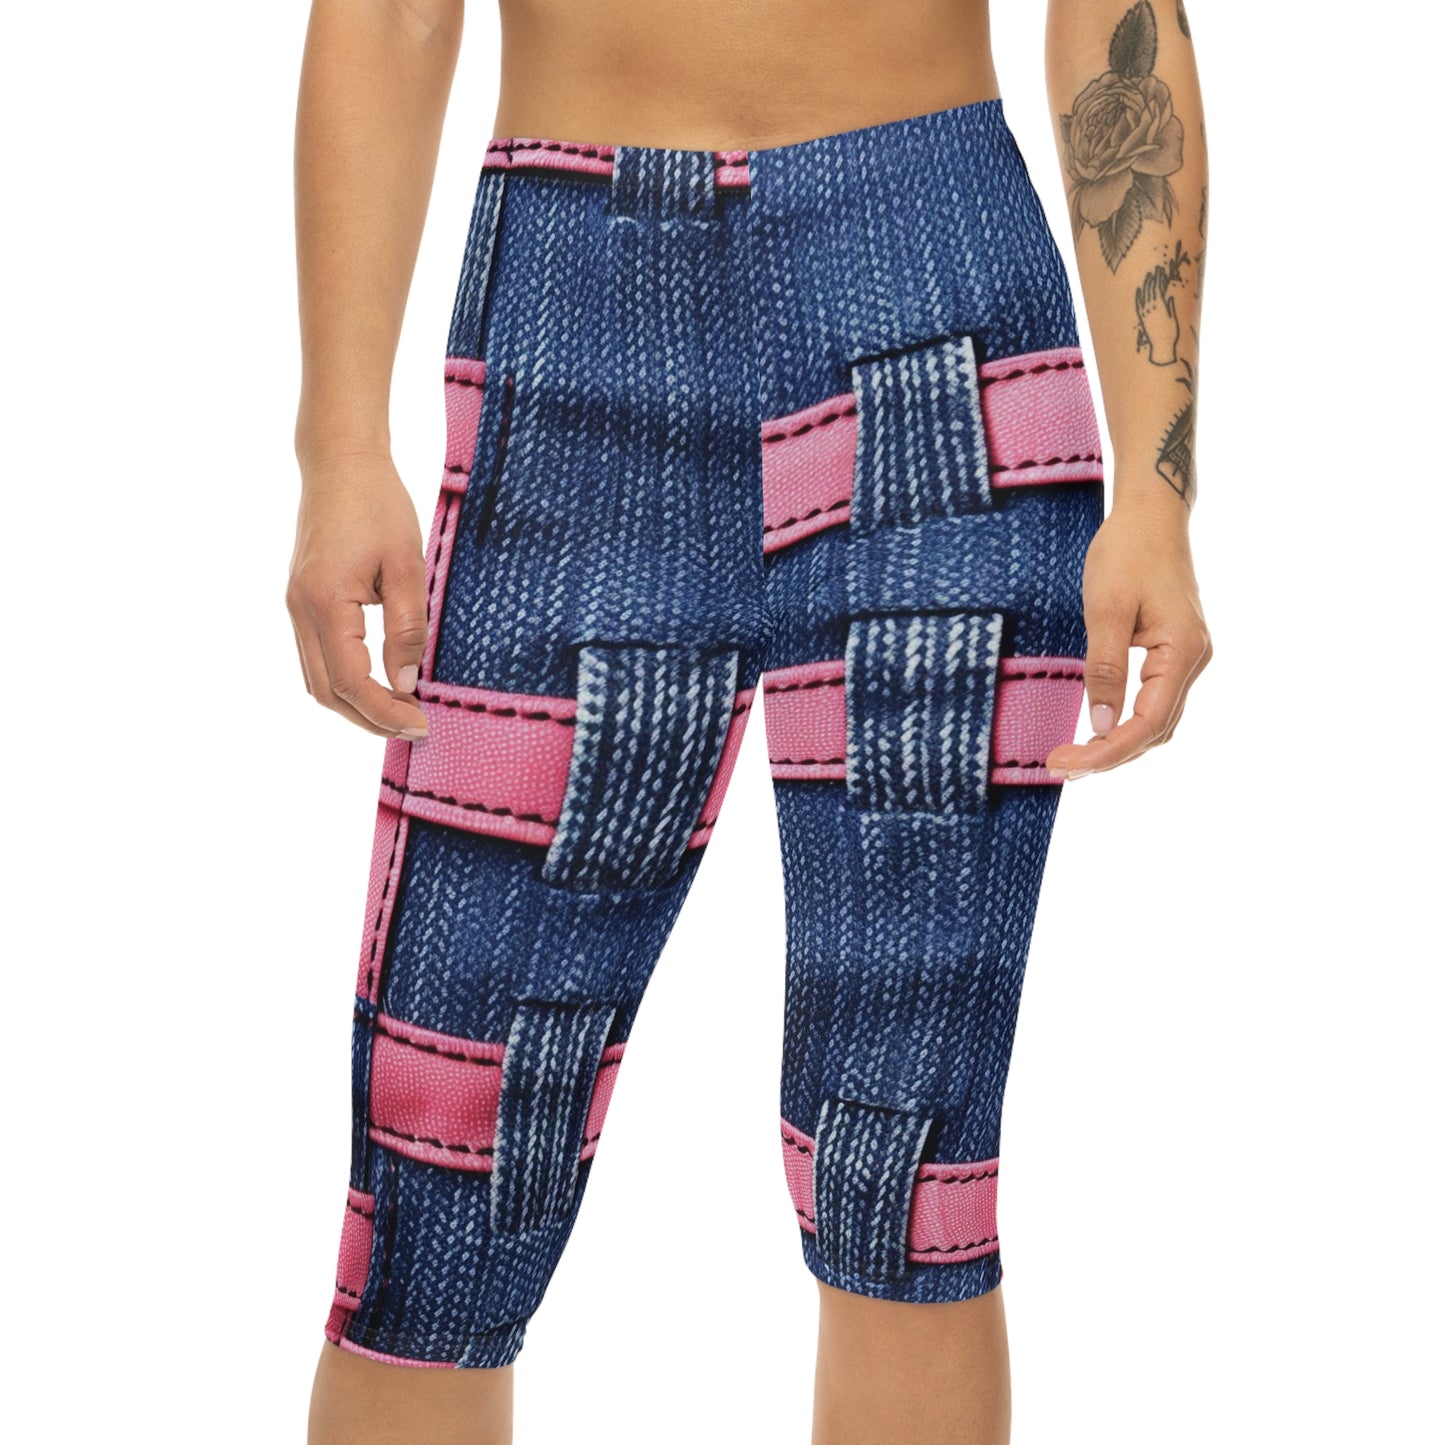 Candy-Striped Crossover: Pink Denim Ribbons Dancing on Blue Stage - Women’s Capri Leggings (AOP)